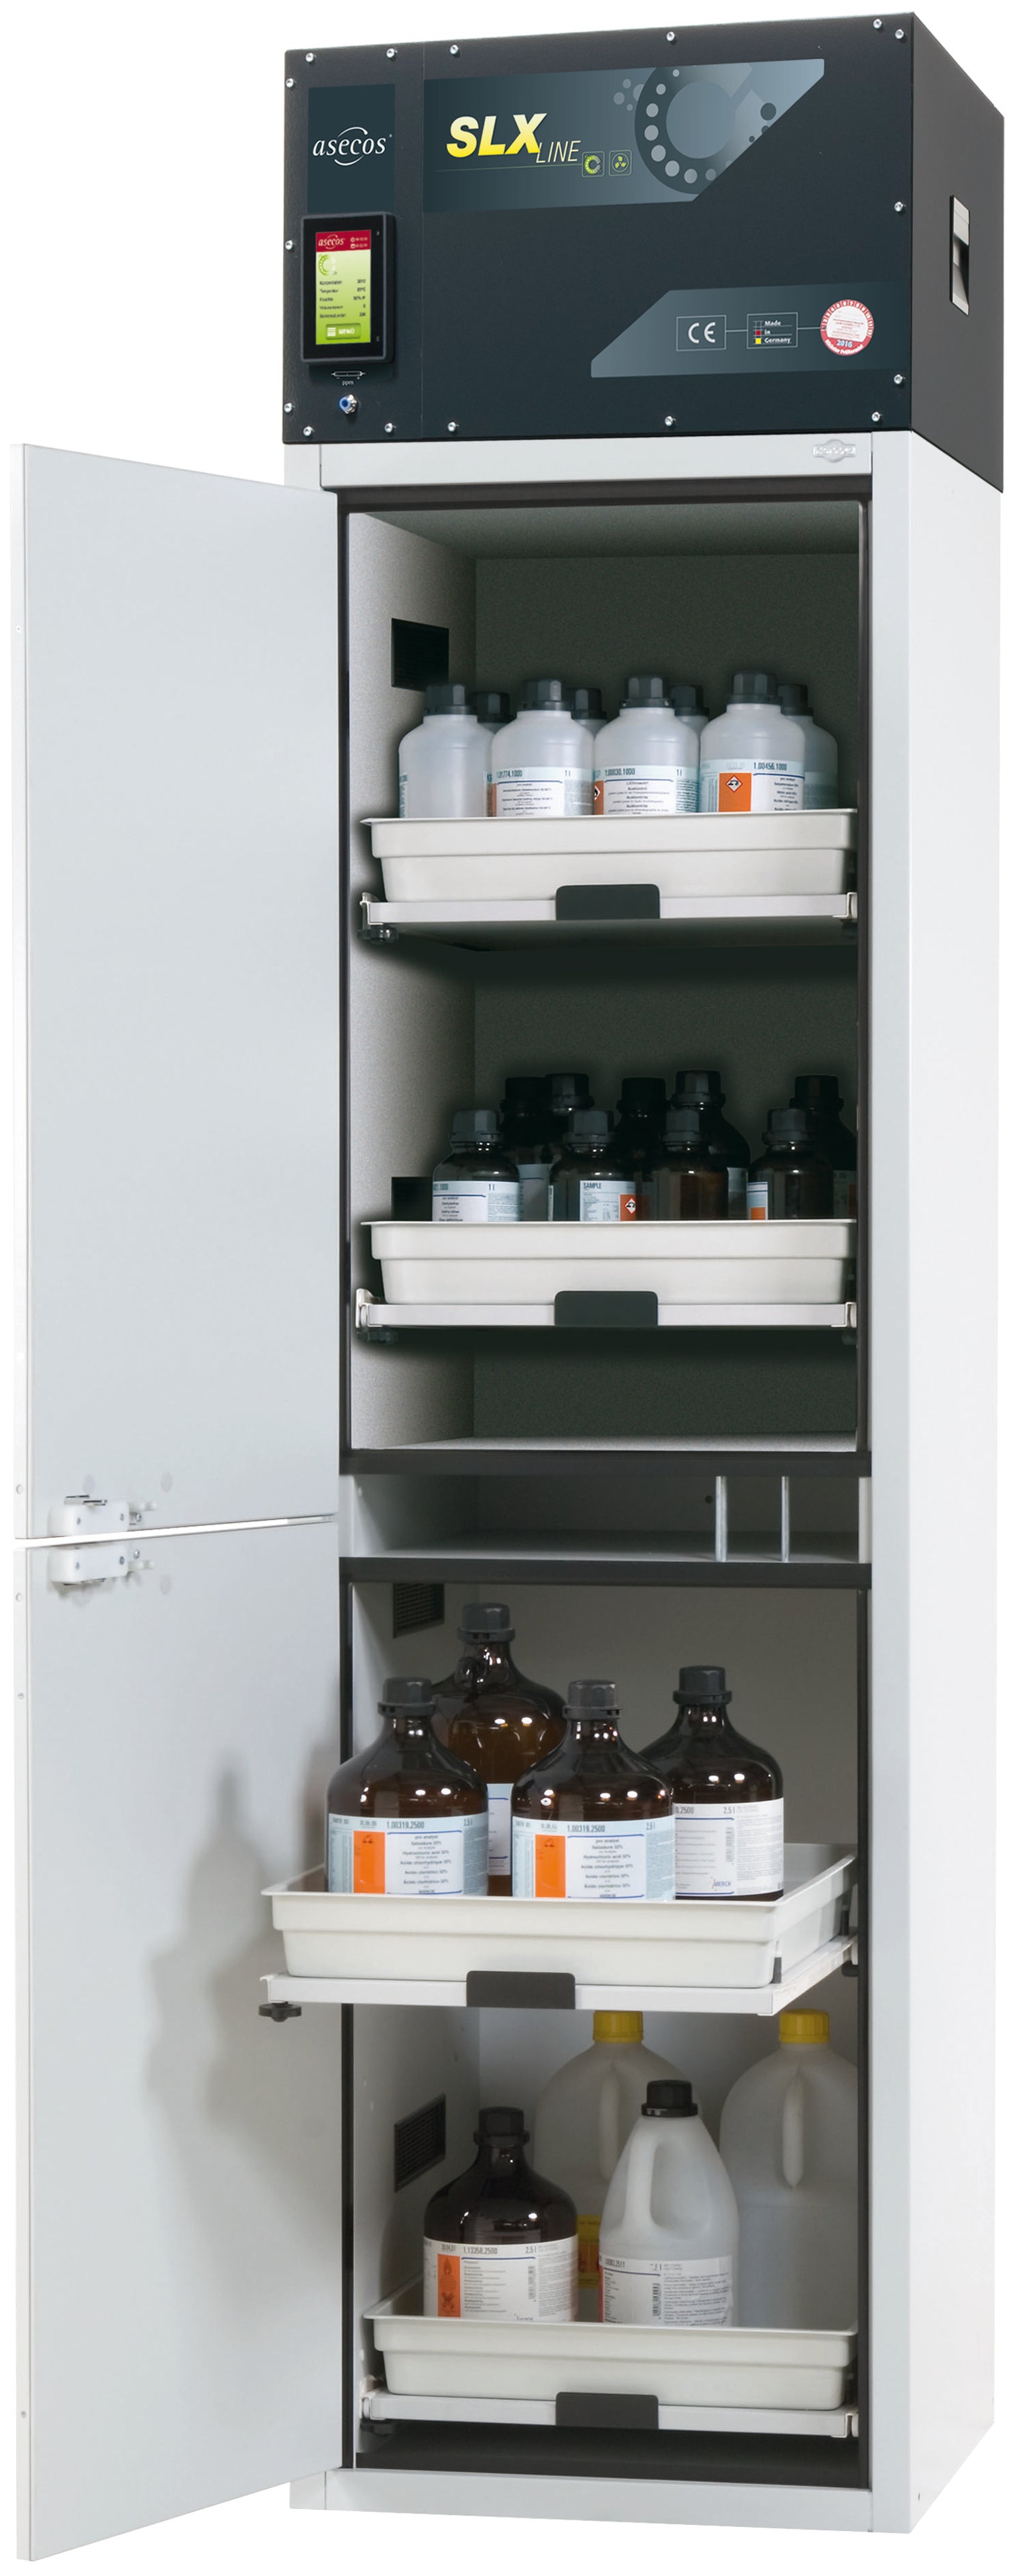 Circulating air filter cabinet SLX-CLASSIC model SLX.230.060.MH in light gray RAL 7035 with 4x AbZ shelf pull-out (FP plate/polypropylene)